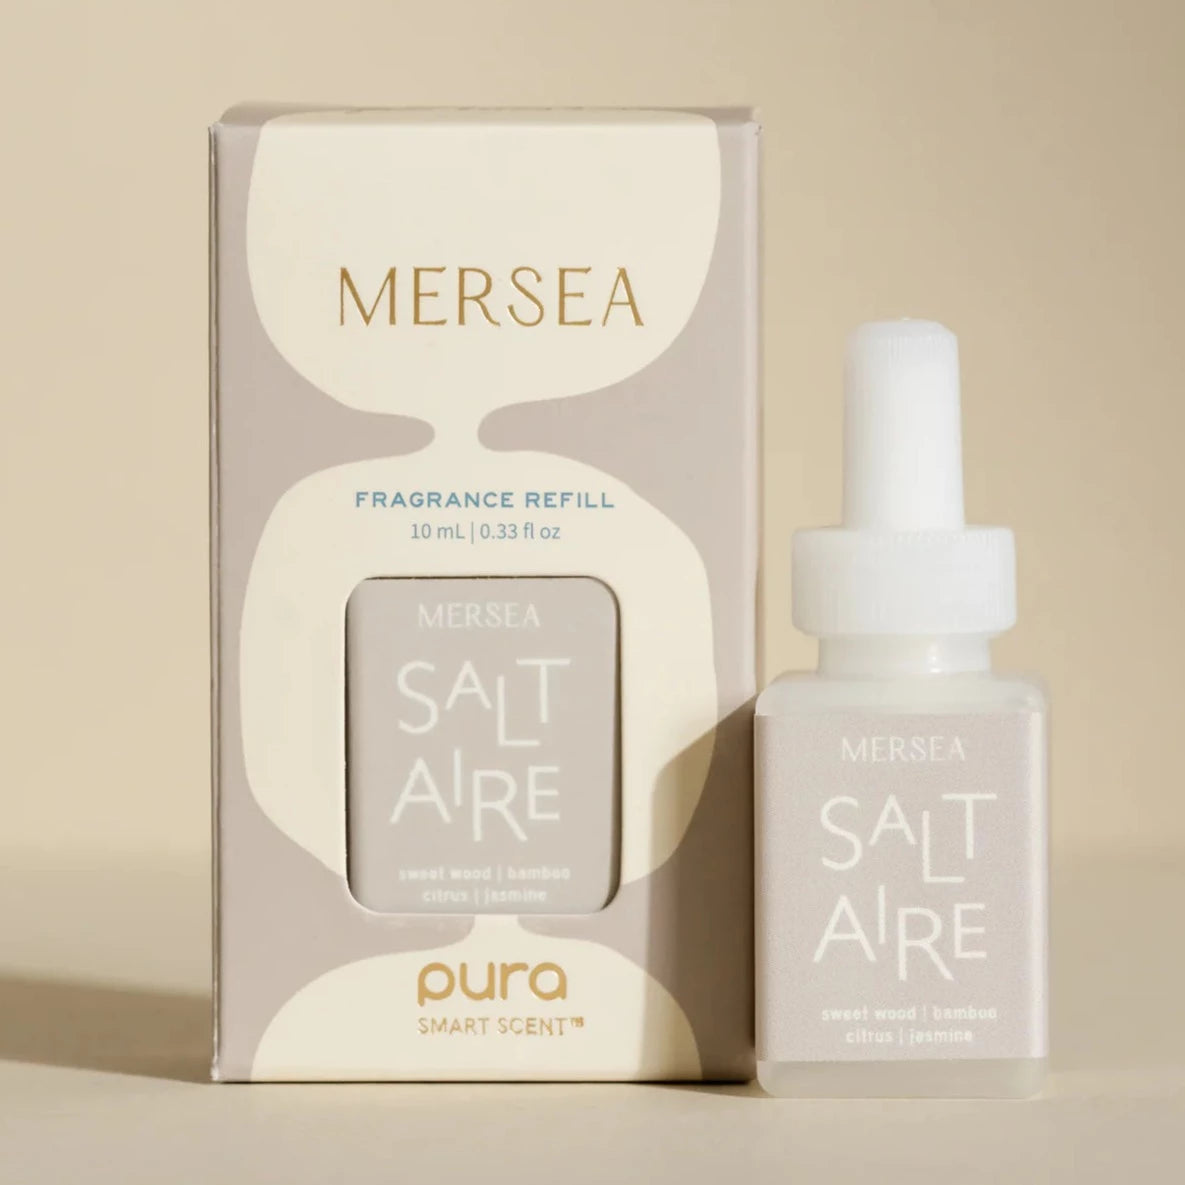 Saltaire by MerSea Pura Diffuser Fragrance Refill - The Preppy Bunny